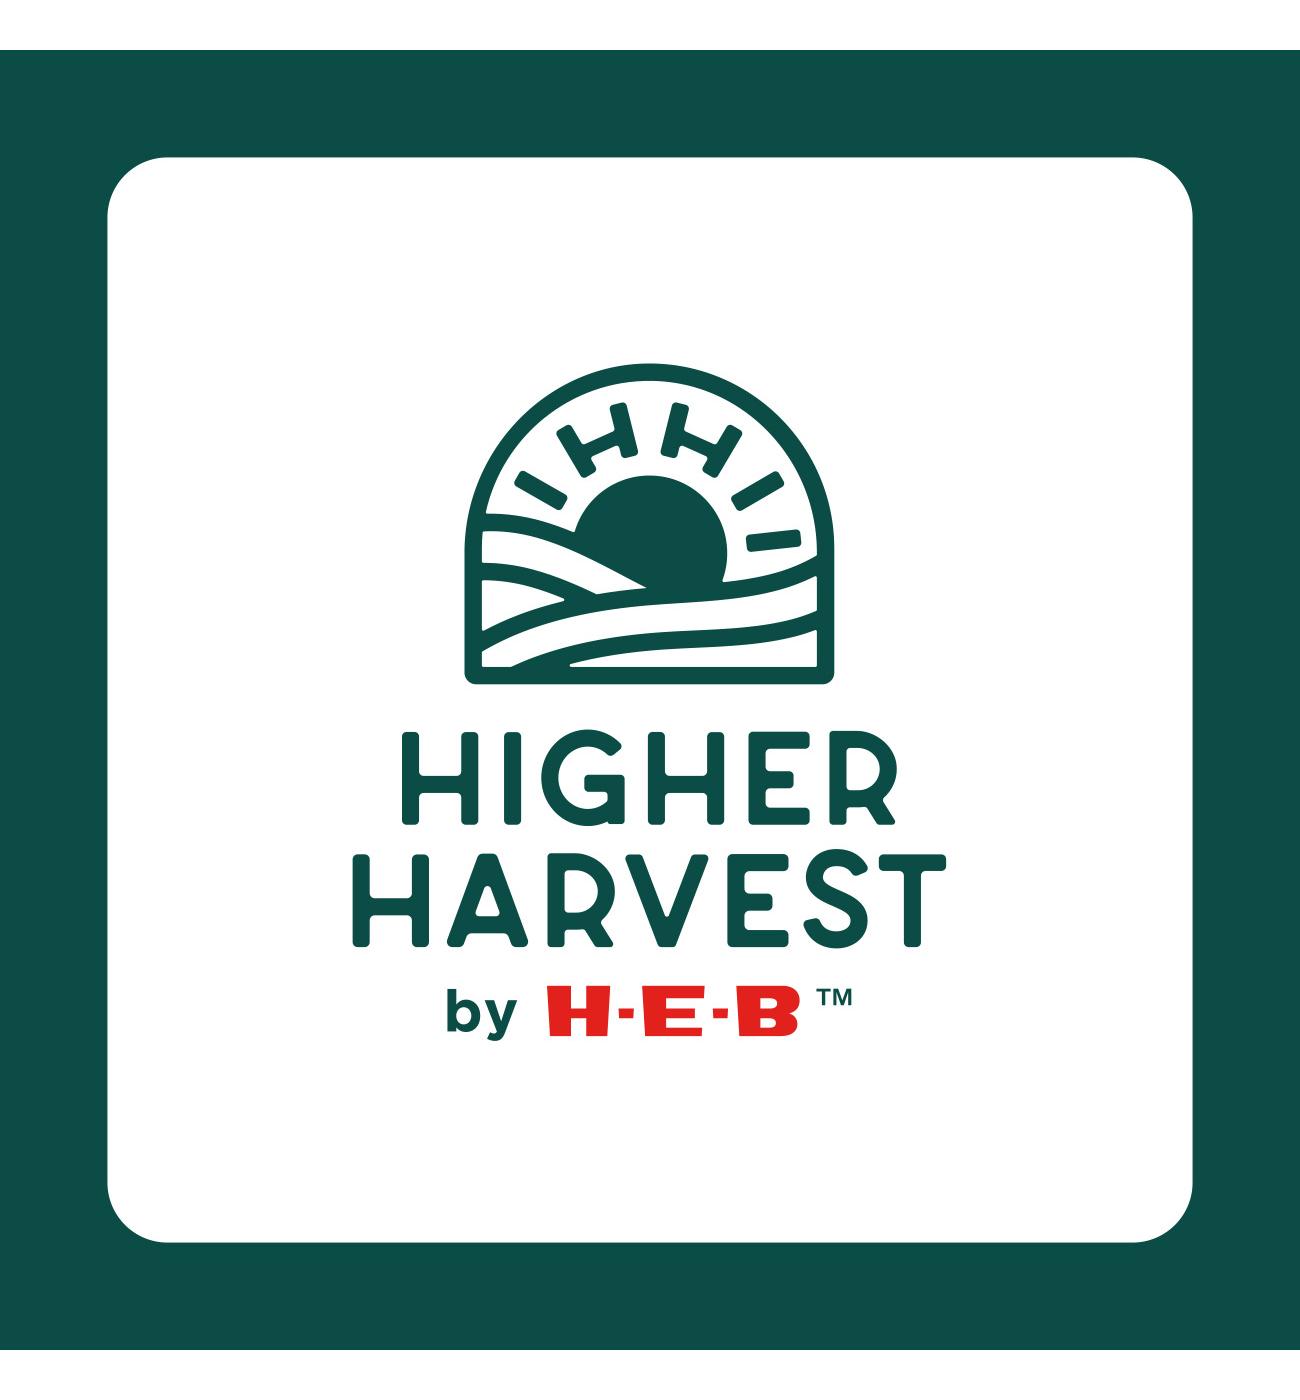 Higher Harvest by H-E-B Non-Dairy Dip & Spread - Kale Pesto; image 2 of 3